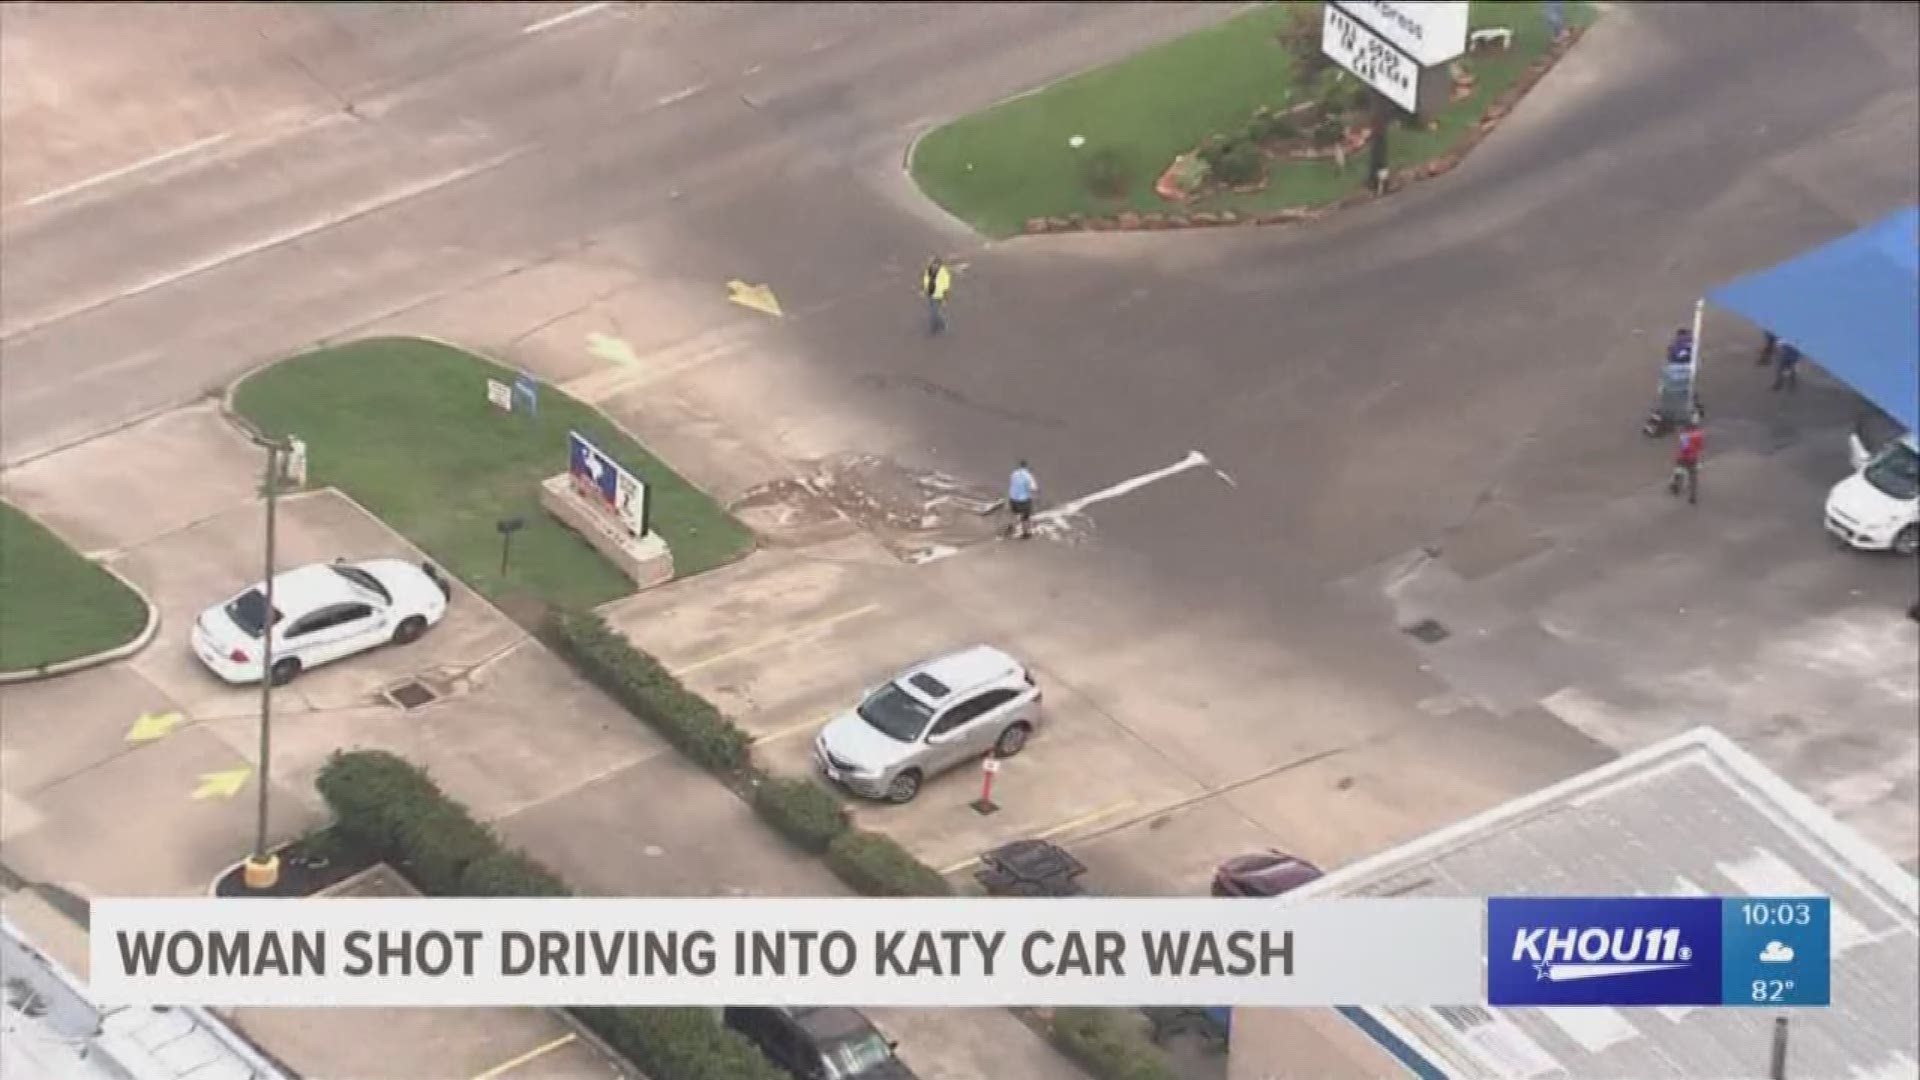 The search continues for a gunman in Katy after a woman was allegedly shot in the arm as she pulled into a car wash.